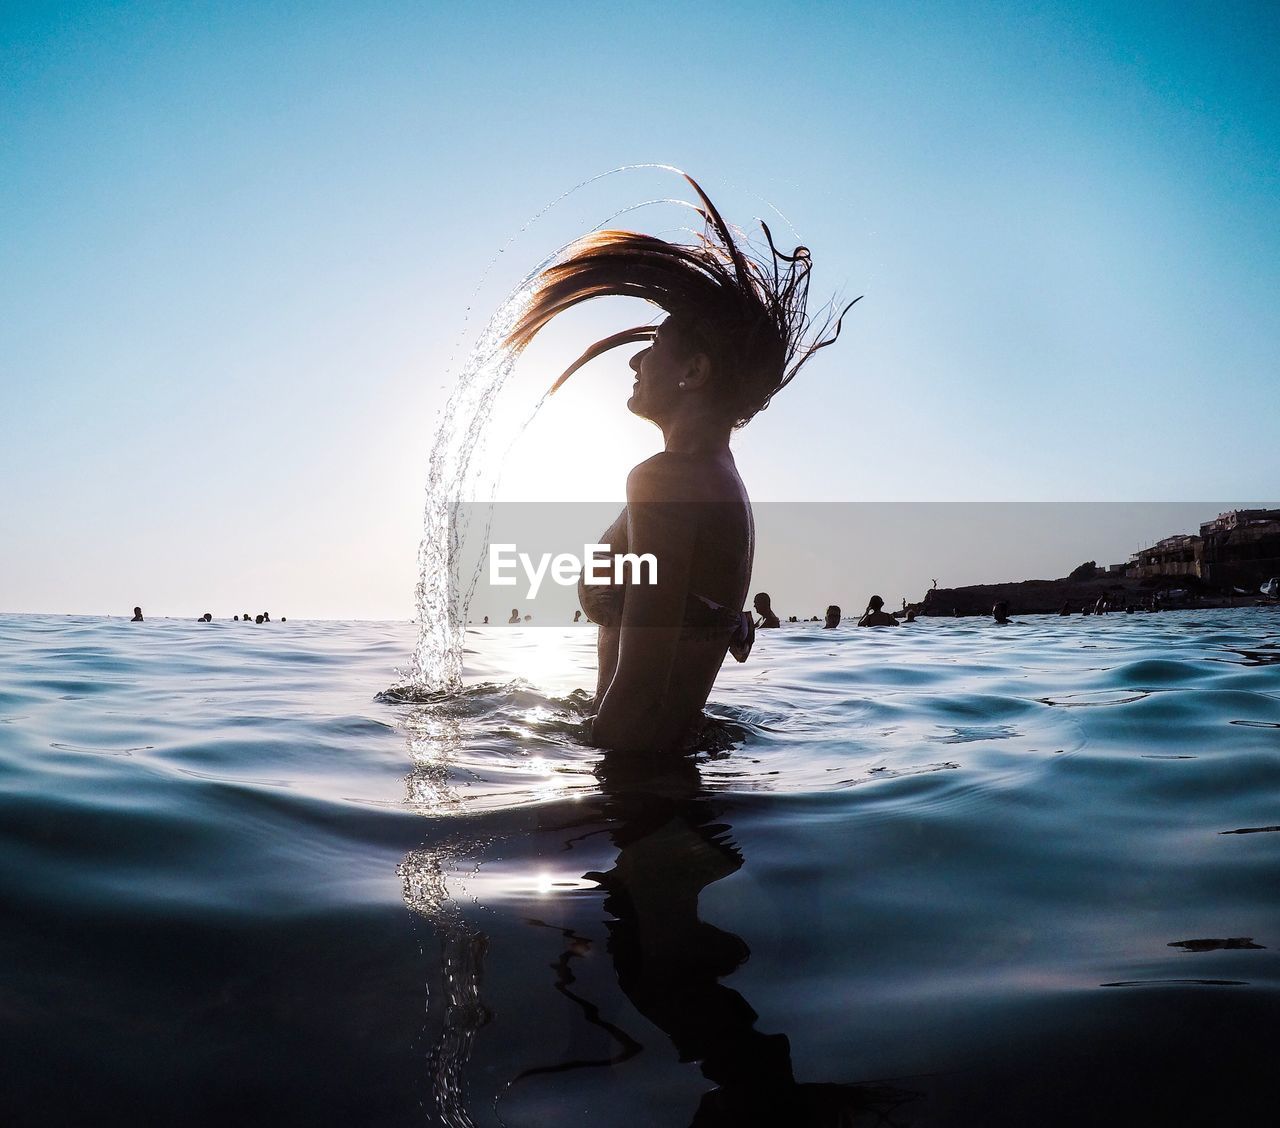 Woman with touseld hair swimming in sea against clear sky